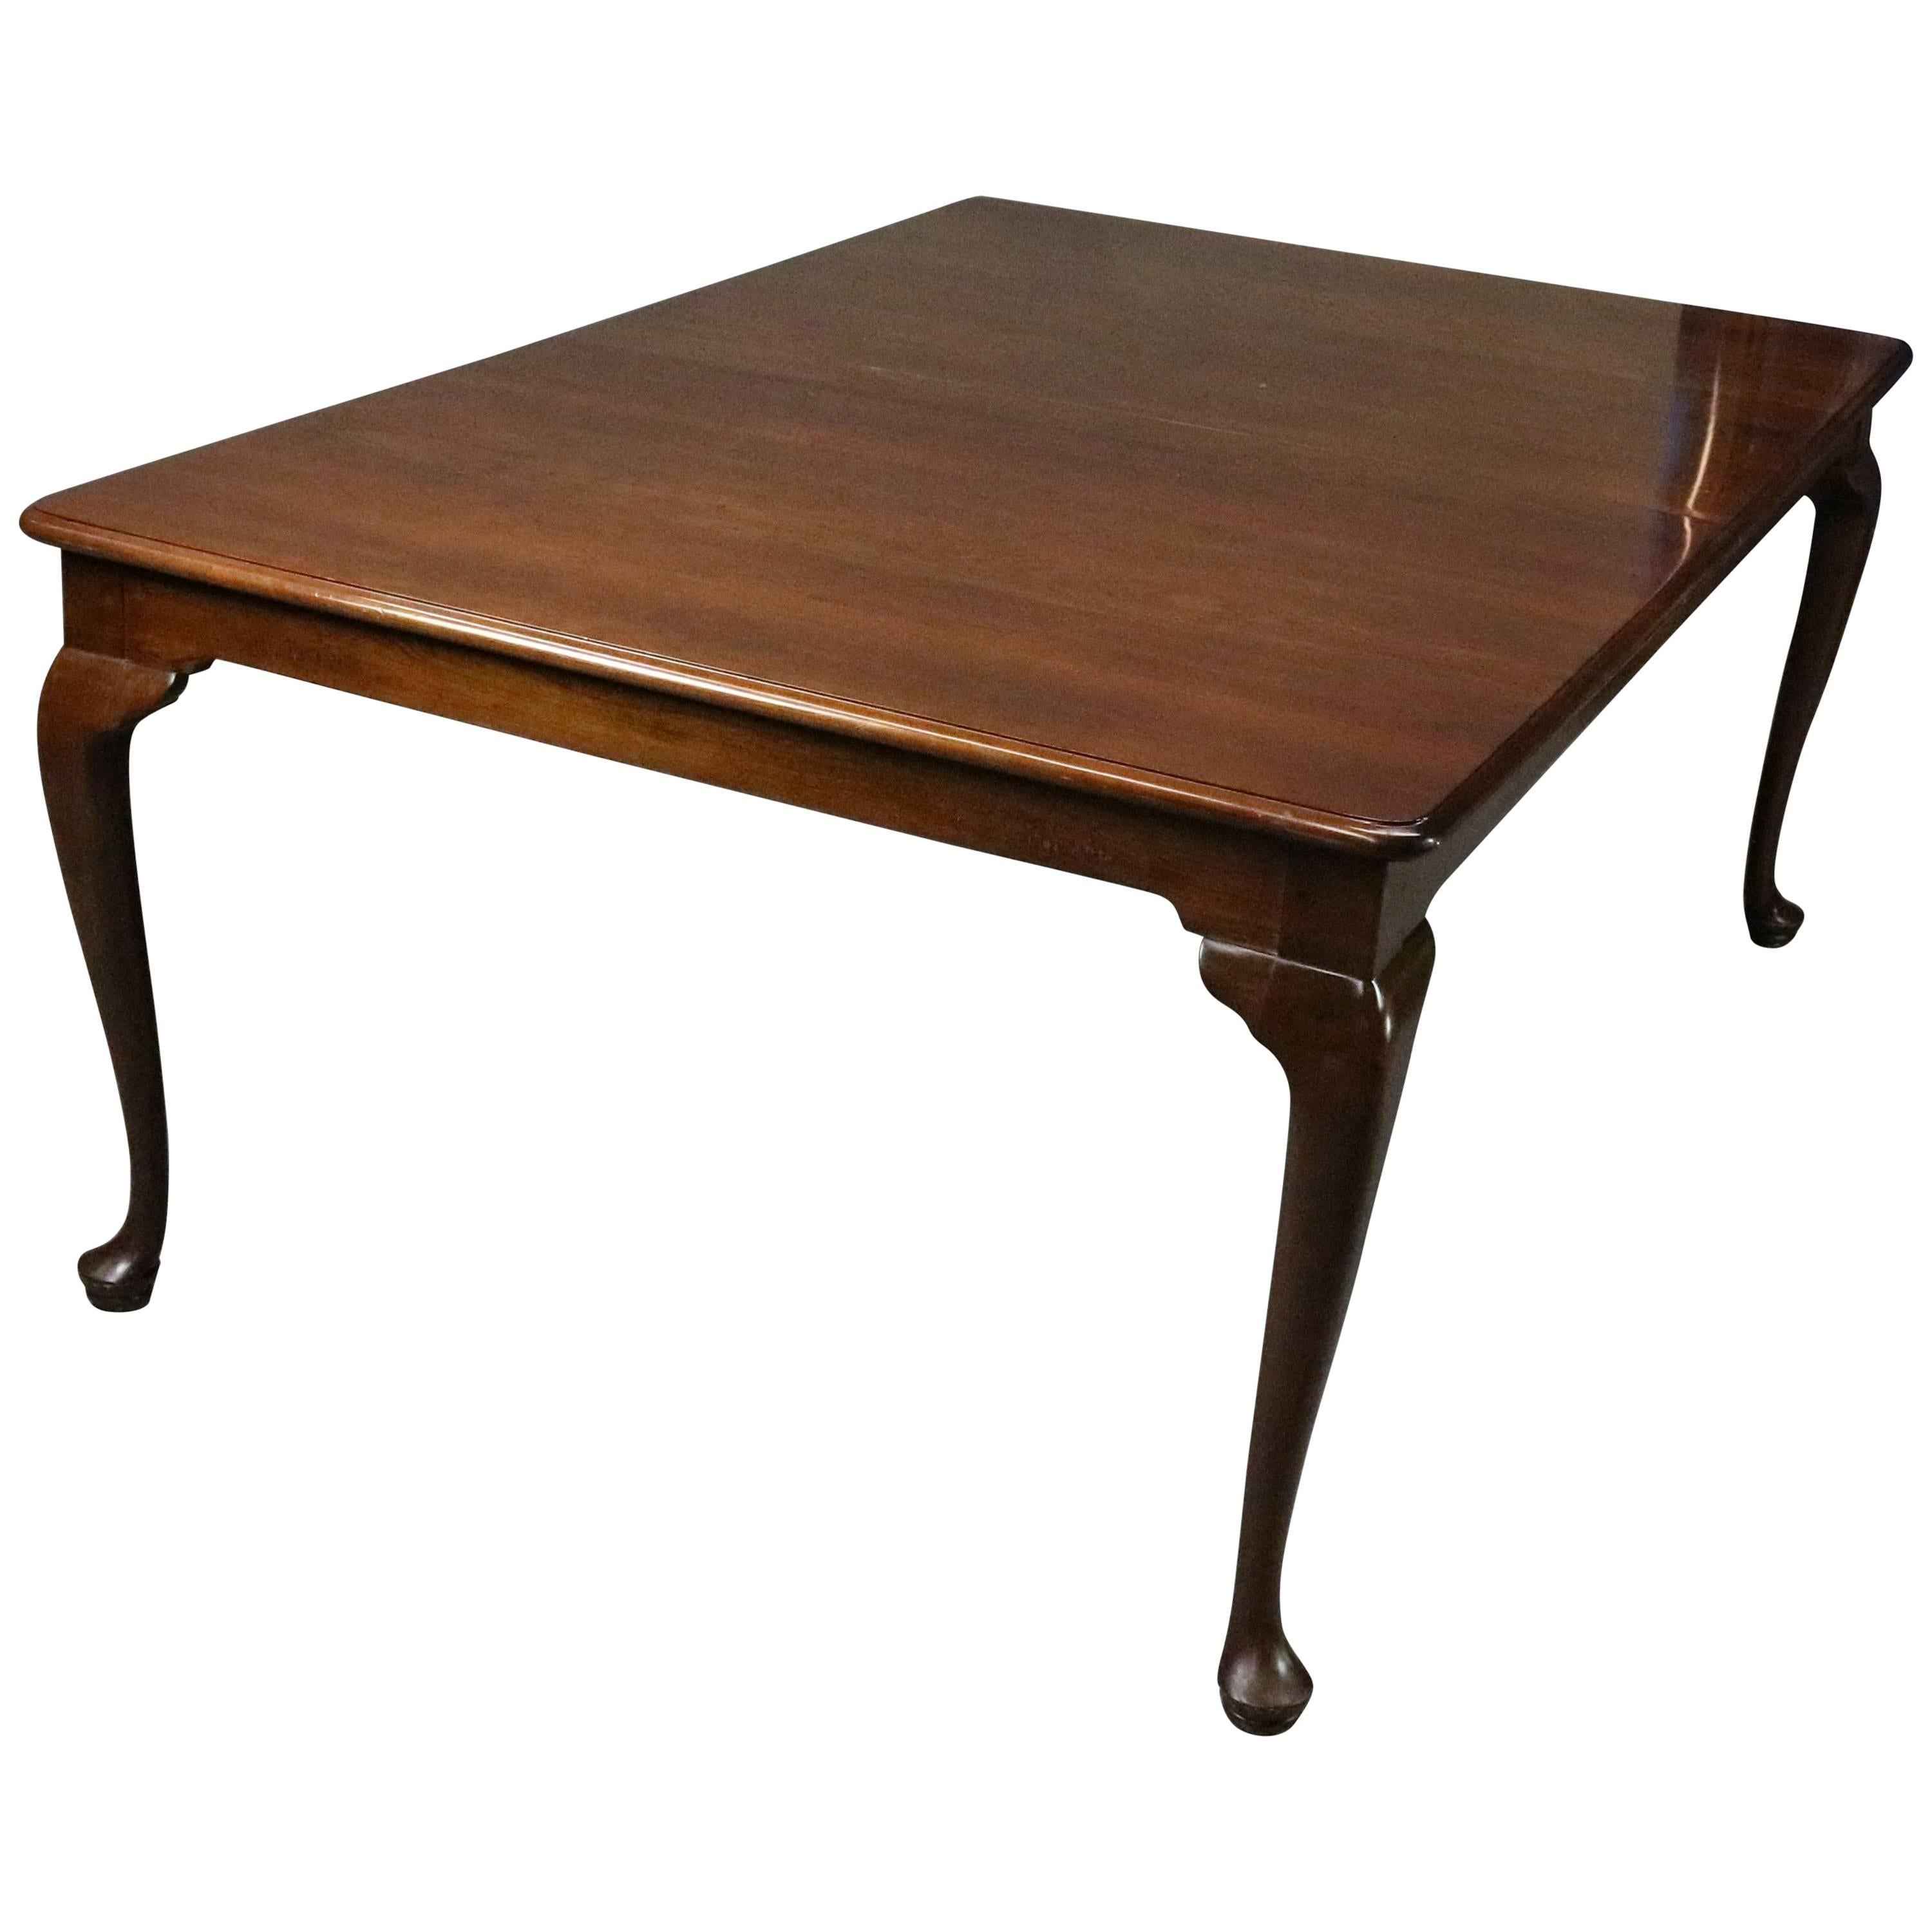 L. & J.G. Stickley Cherry Valley Collection Dining Table with Four Leaves